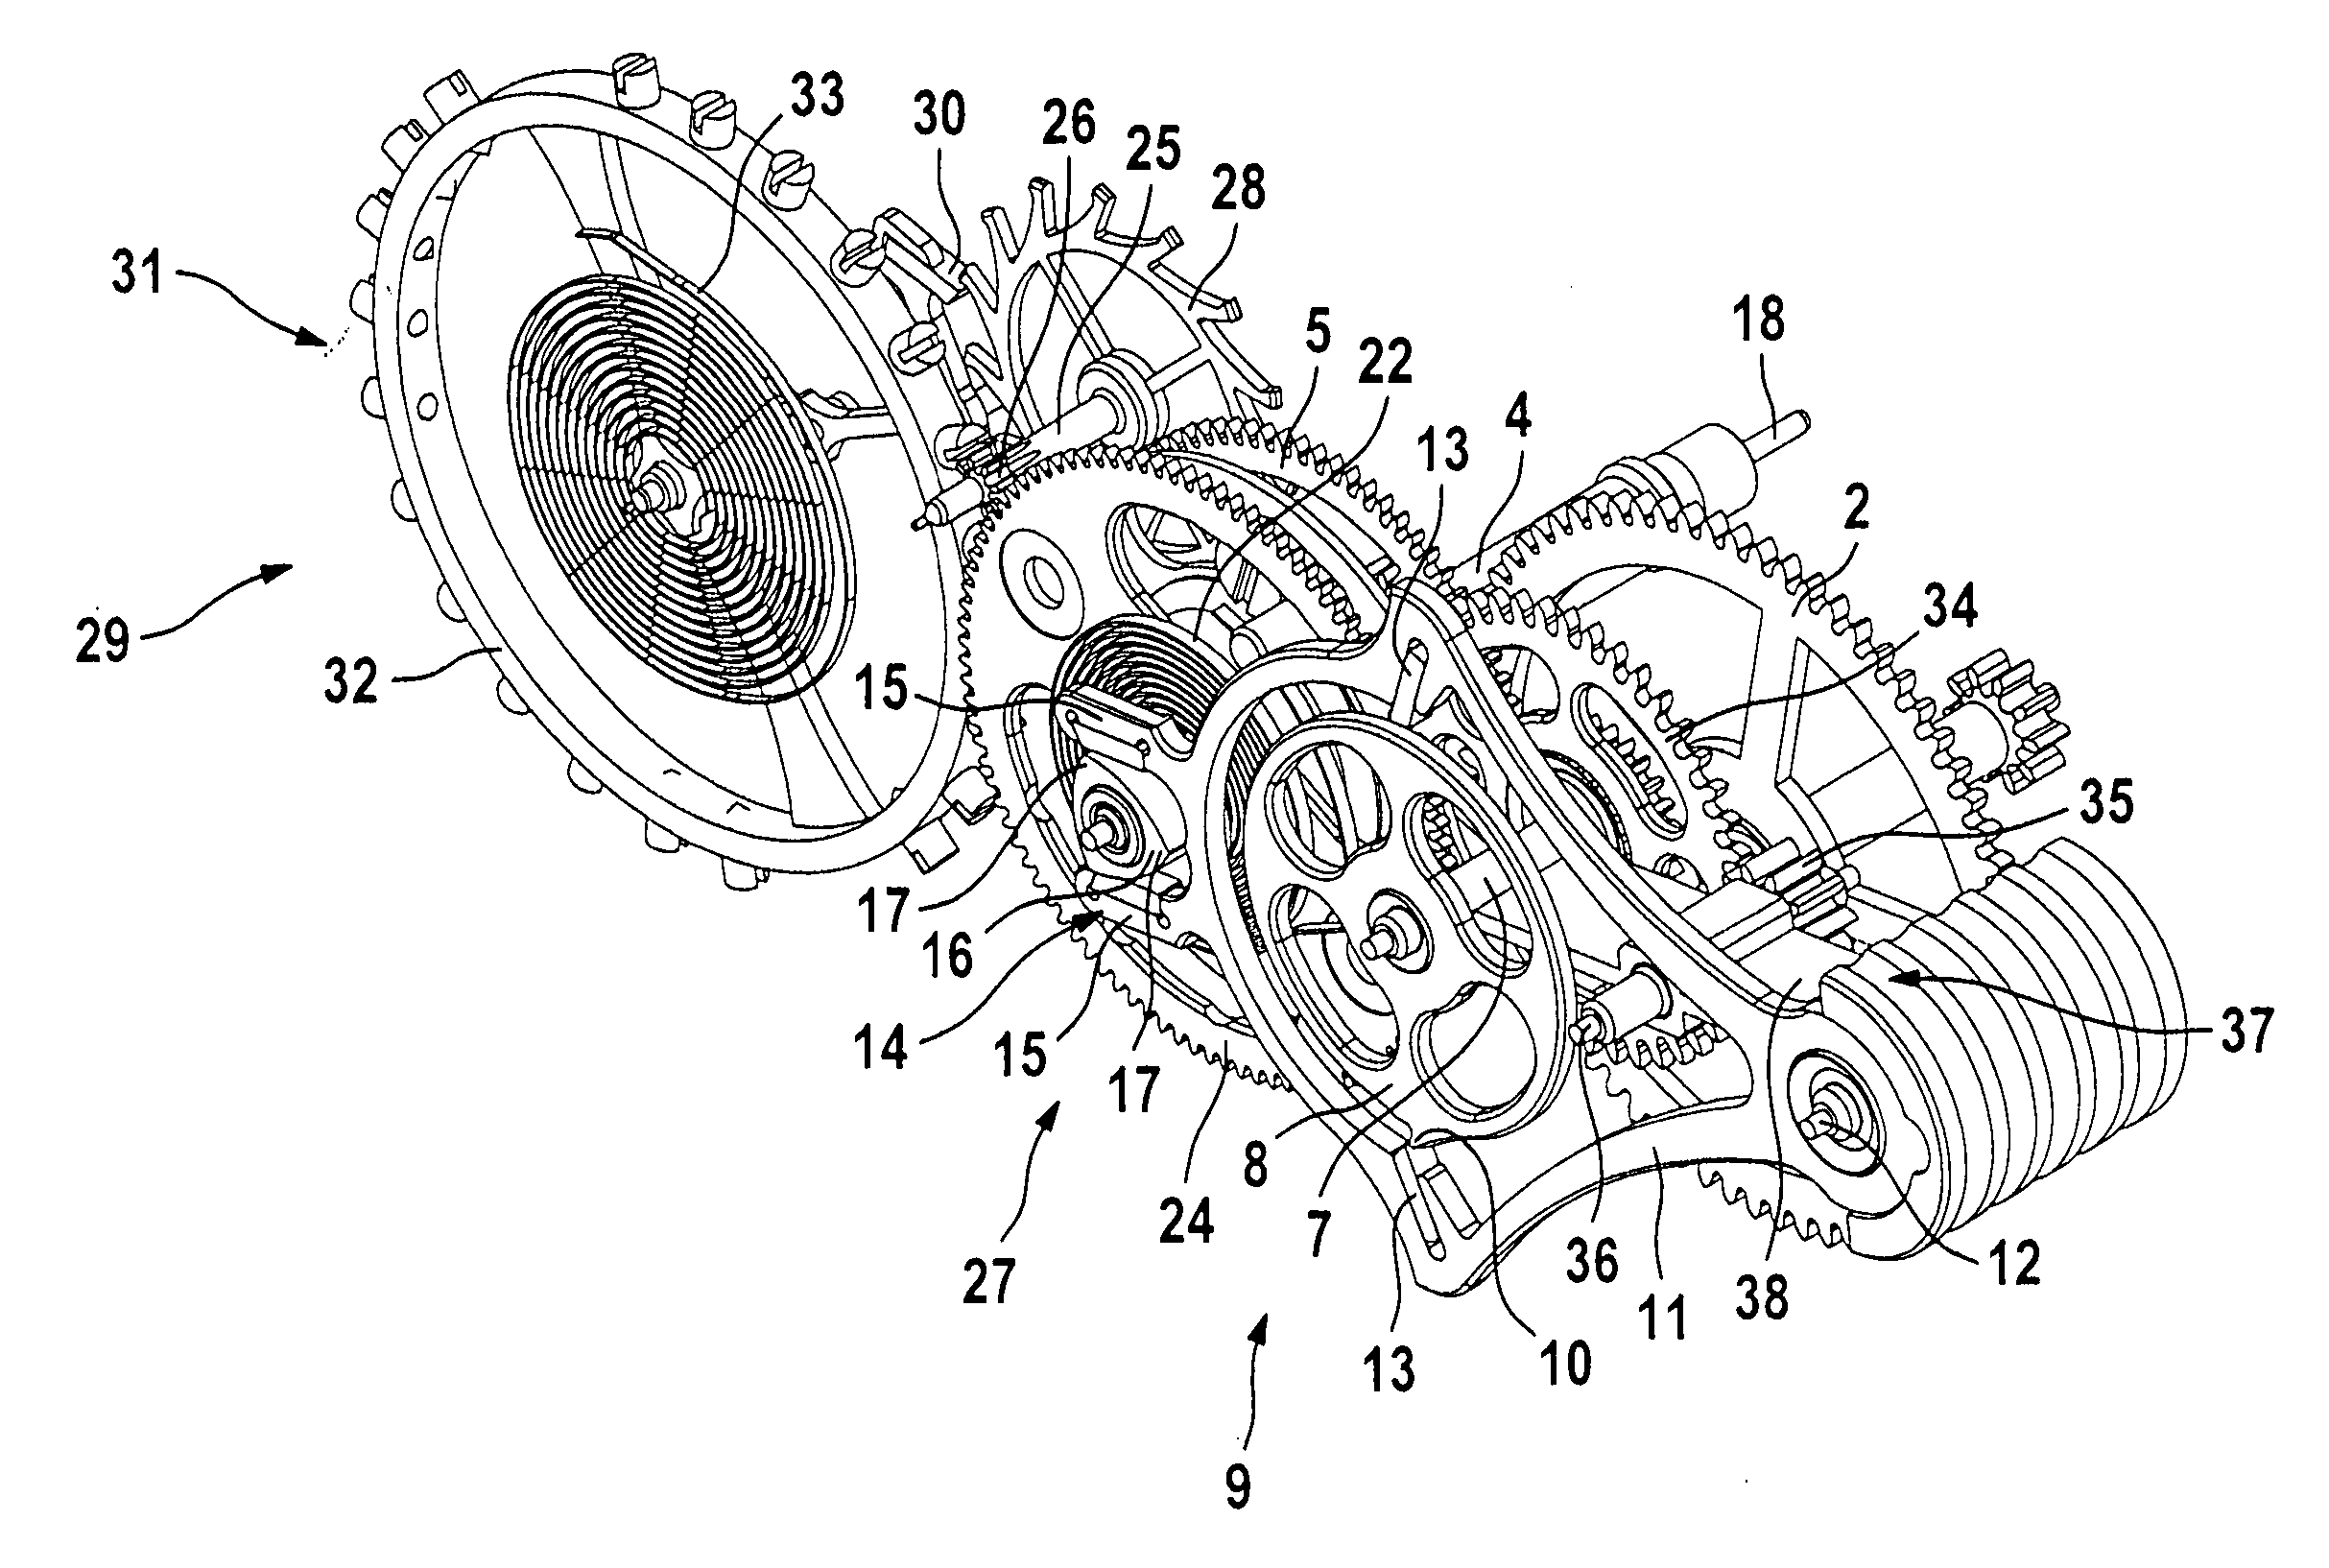 Timepiece with a constant-force device for acting on an oscillating system